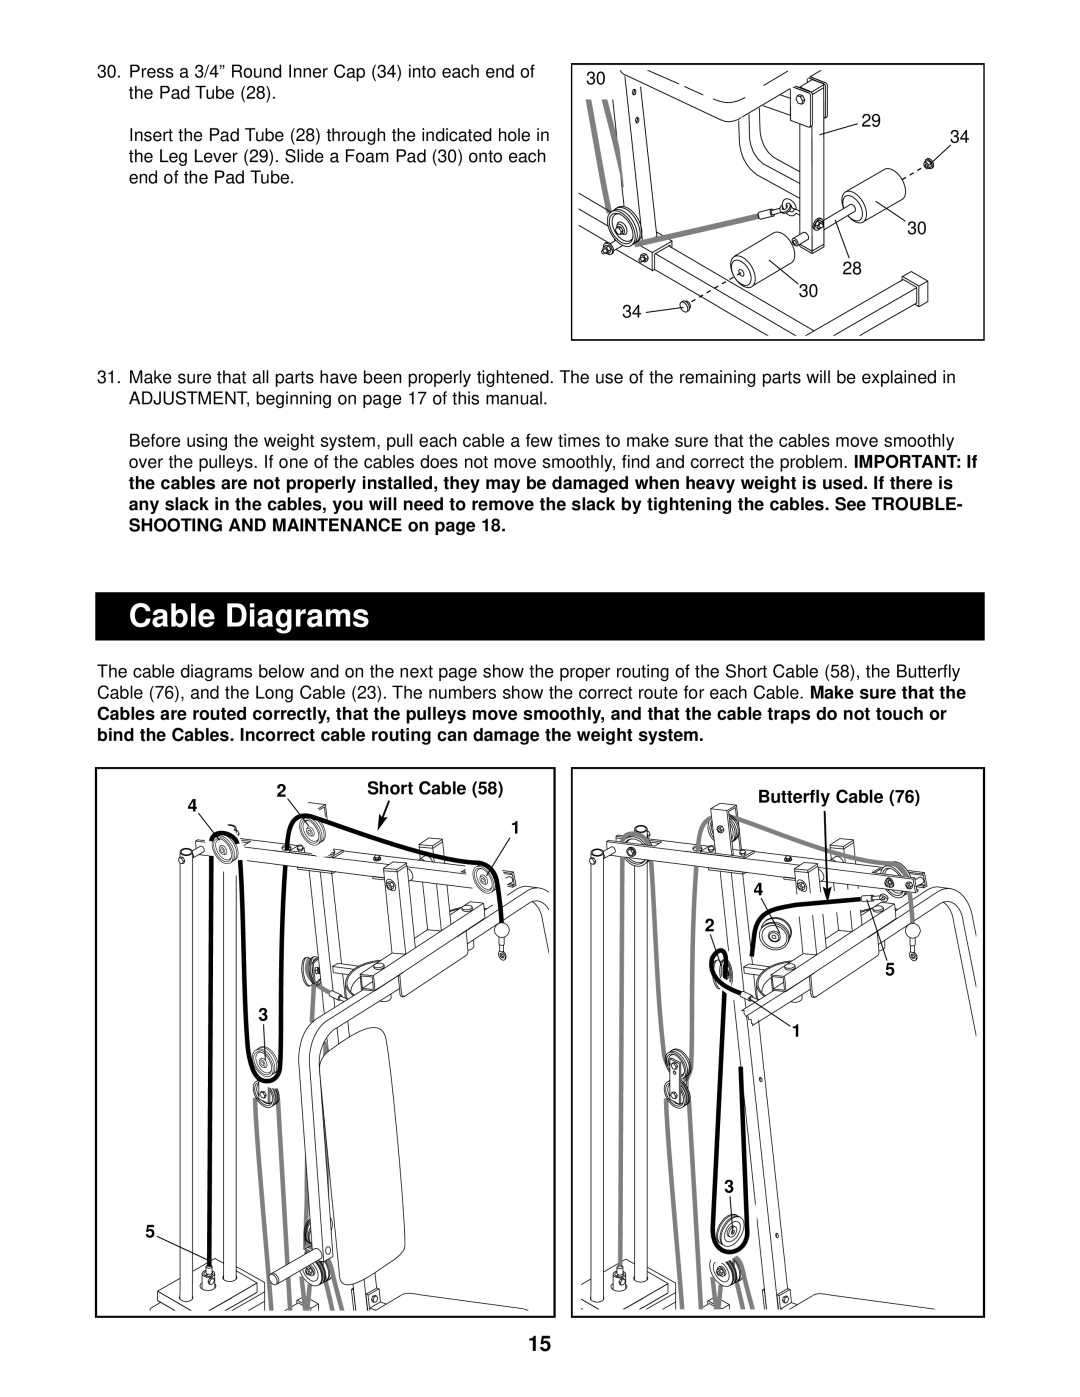 Weider 740 user manual Cable Diagrams, SHOOTING AND MAINTENANCE on page, Short Cable, Butterfly Cable 